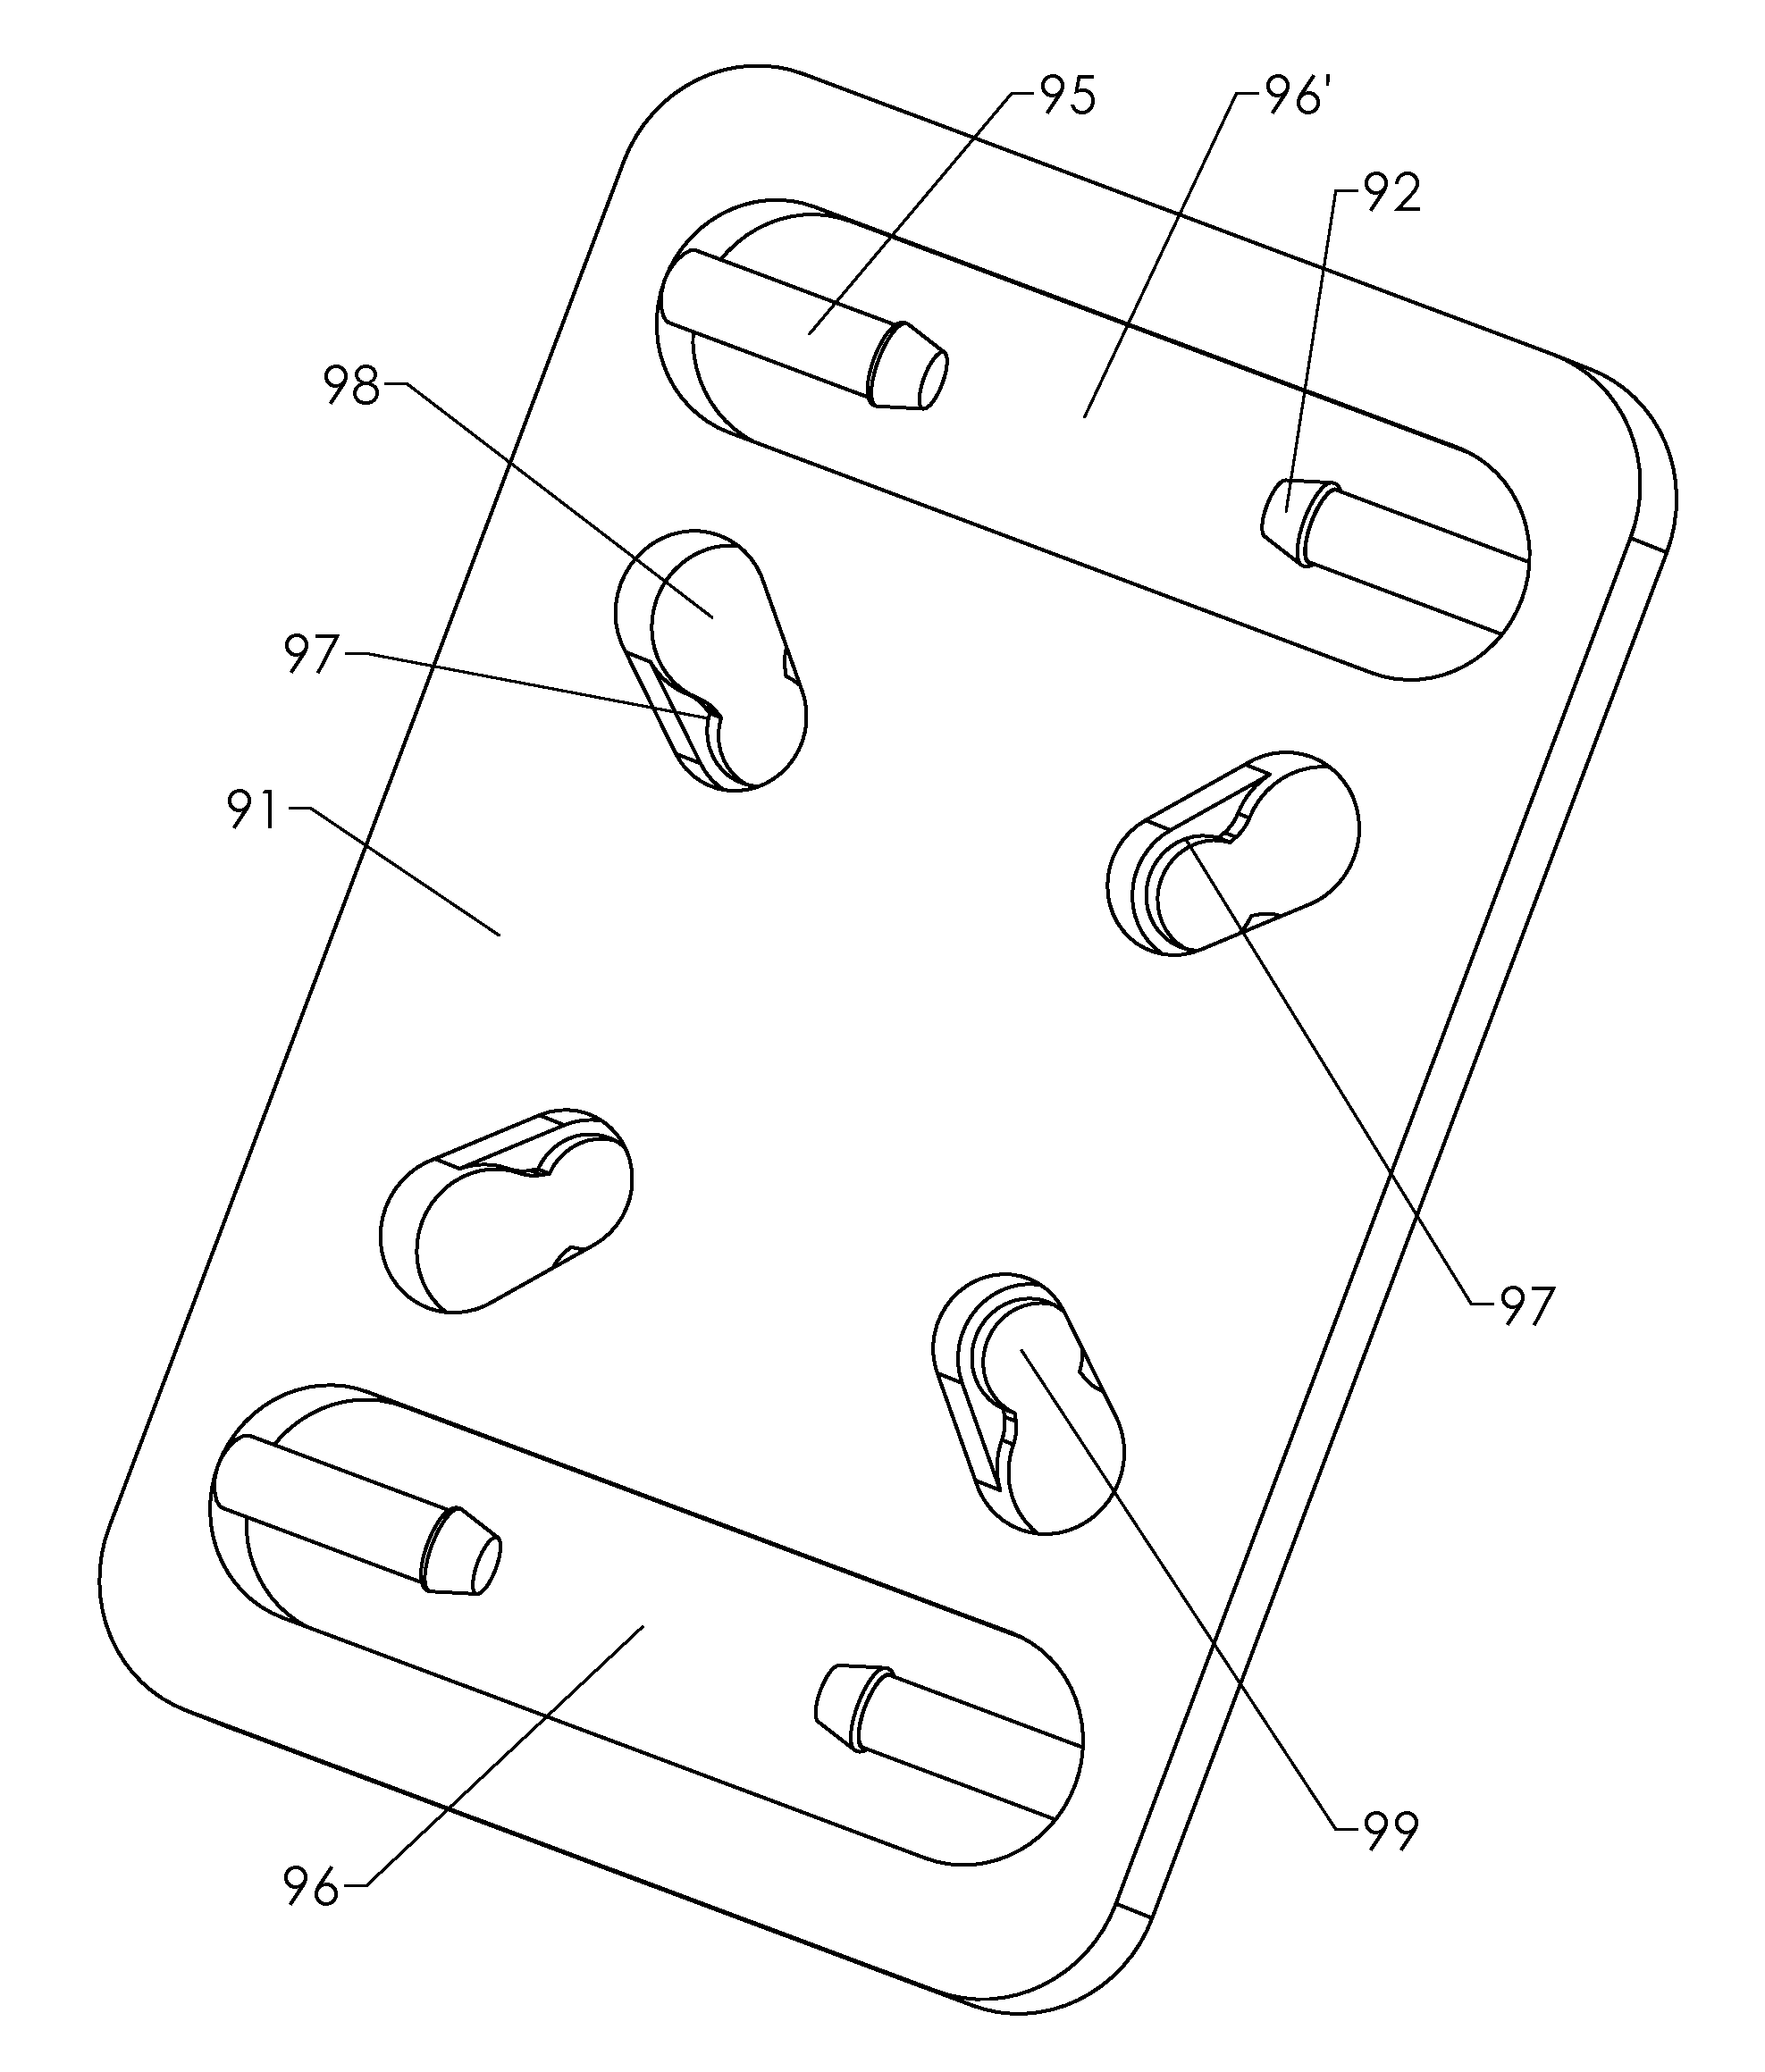 Multiple suction cup attachment platform: securing an electronic device on a vertical surface